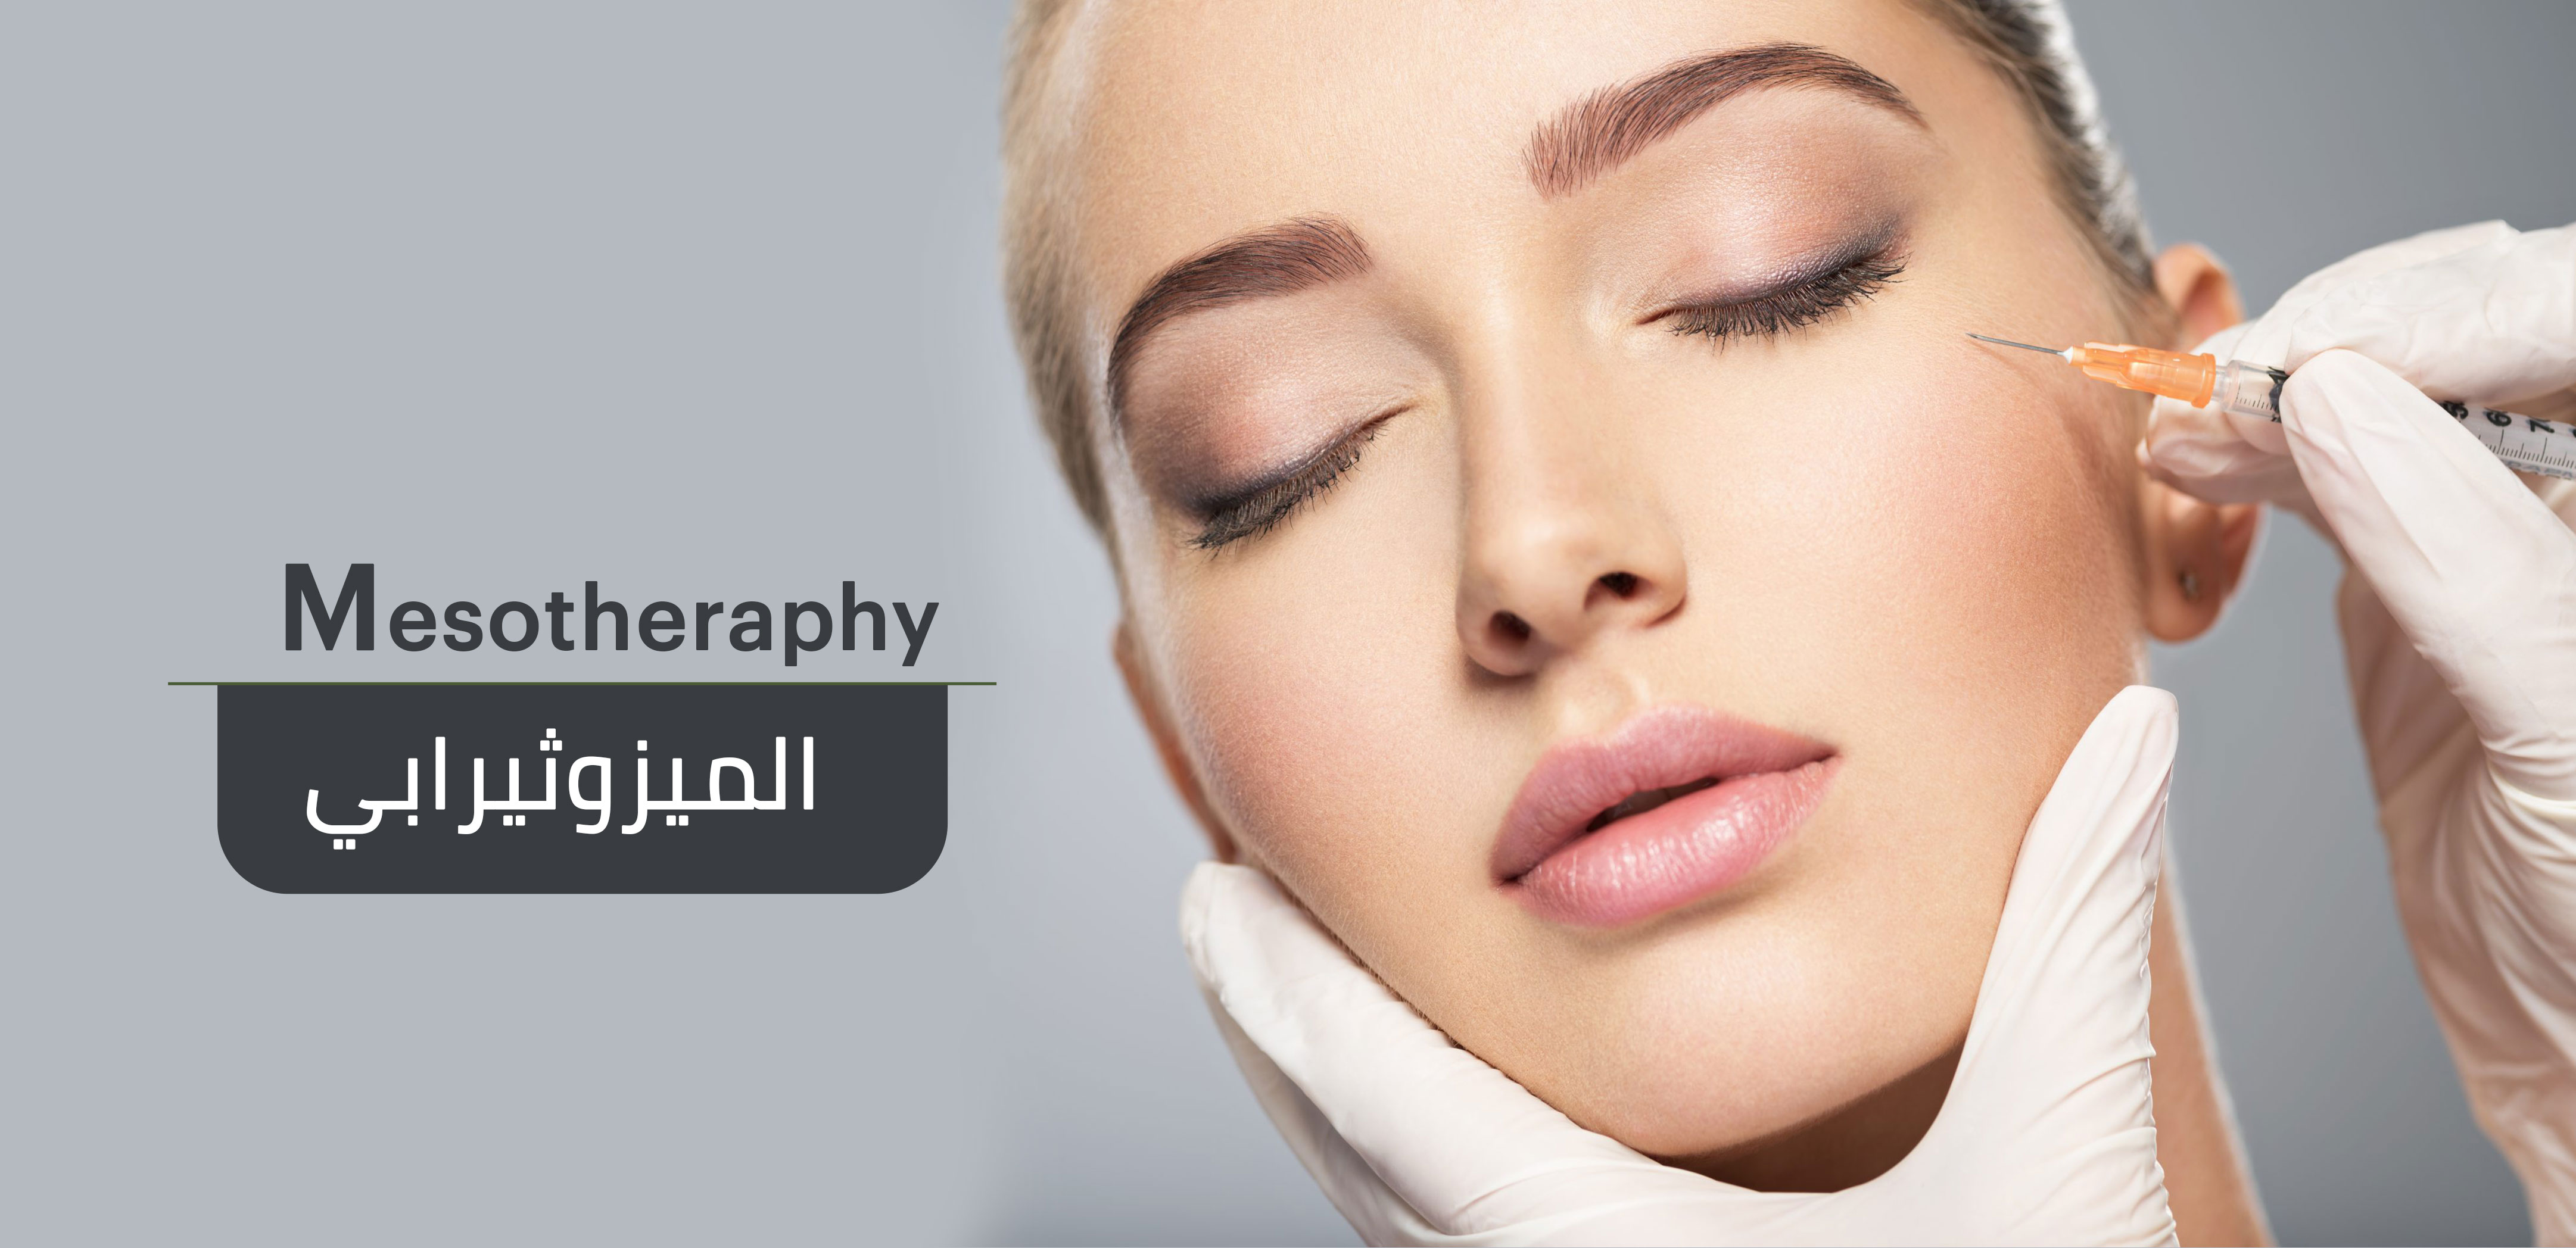 WHAT IS MESOTHERAPY?